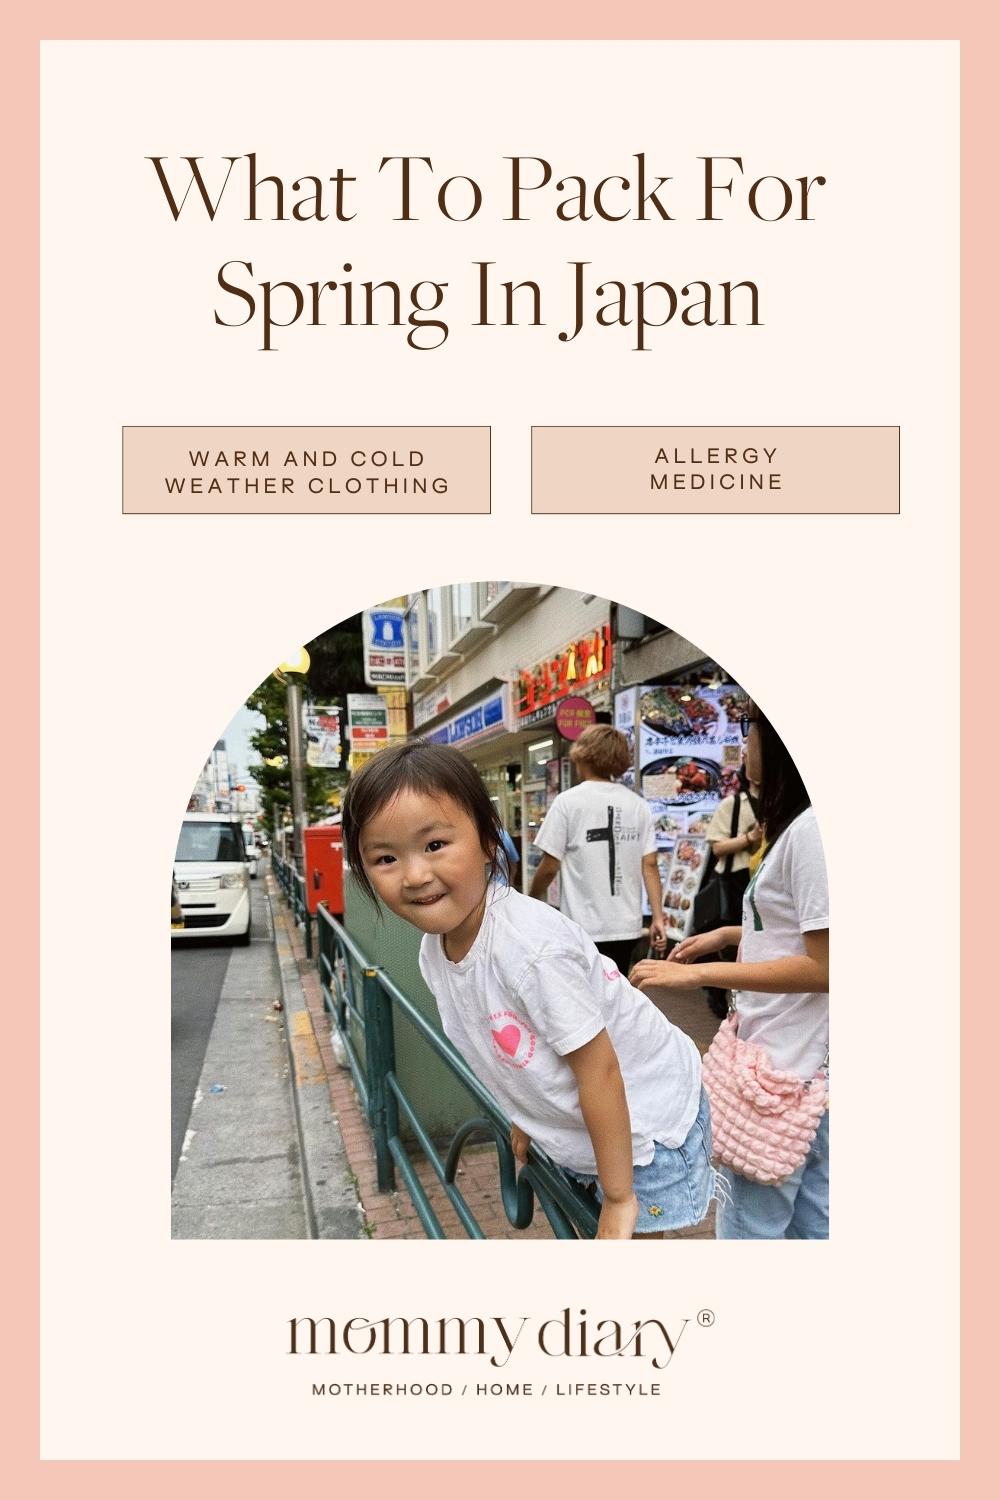 What To Pack For Spring in Japan